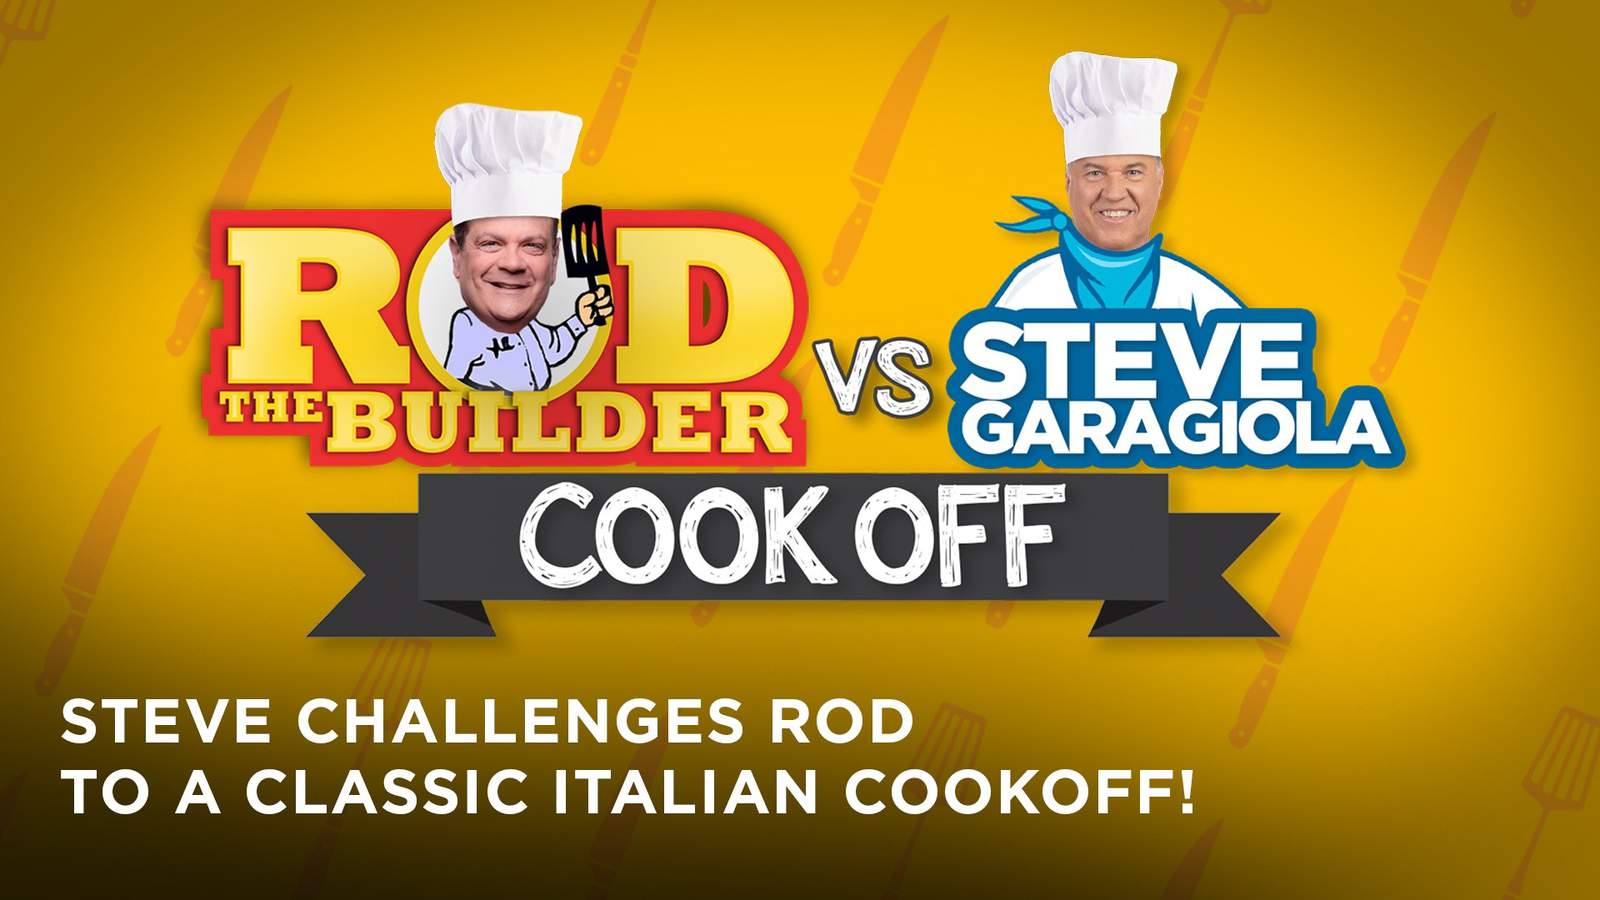 Rod the Builder vs. Steve Garagiola in classic Italian cook-off (with recipes)